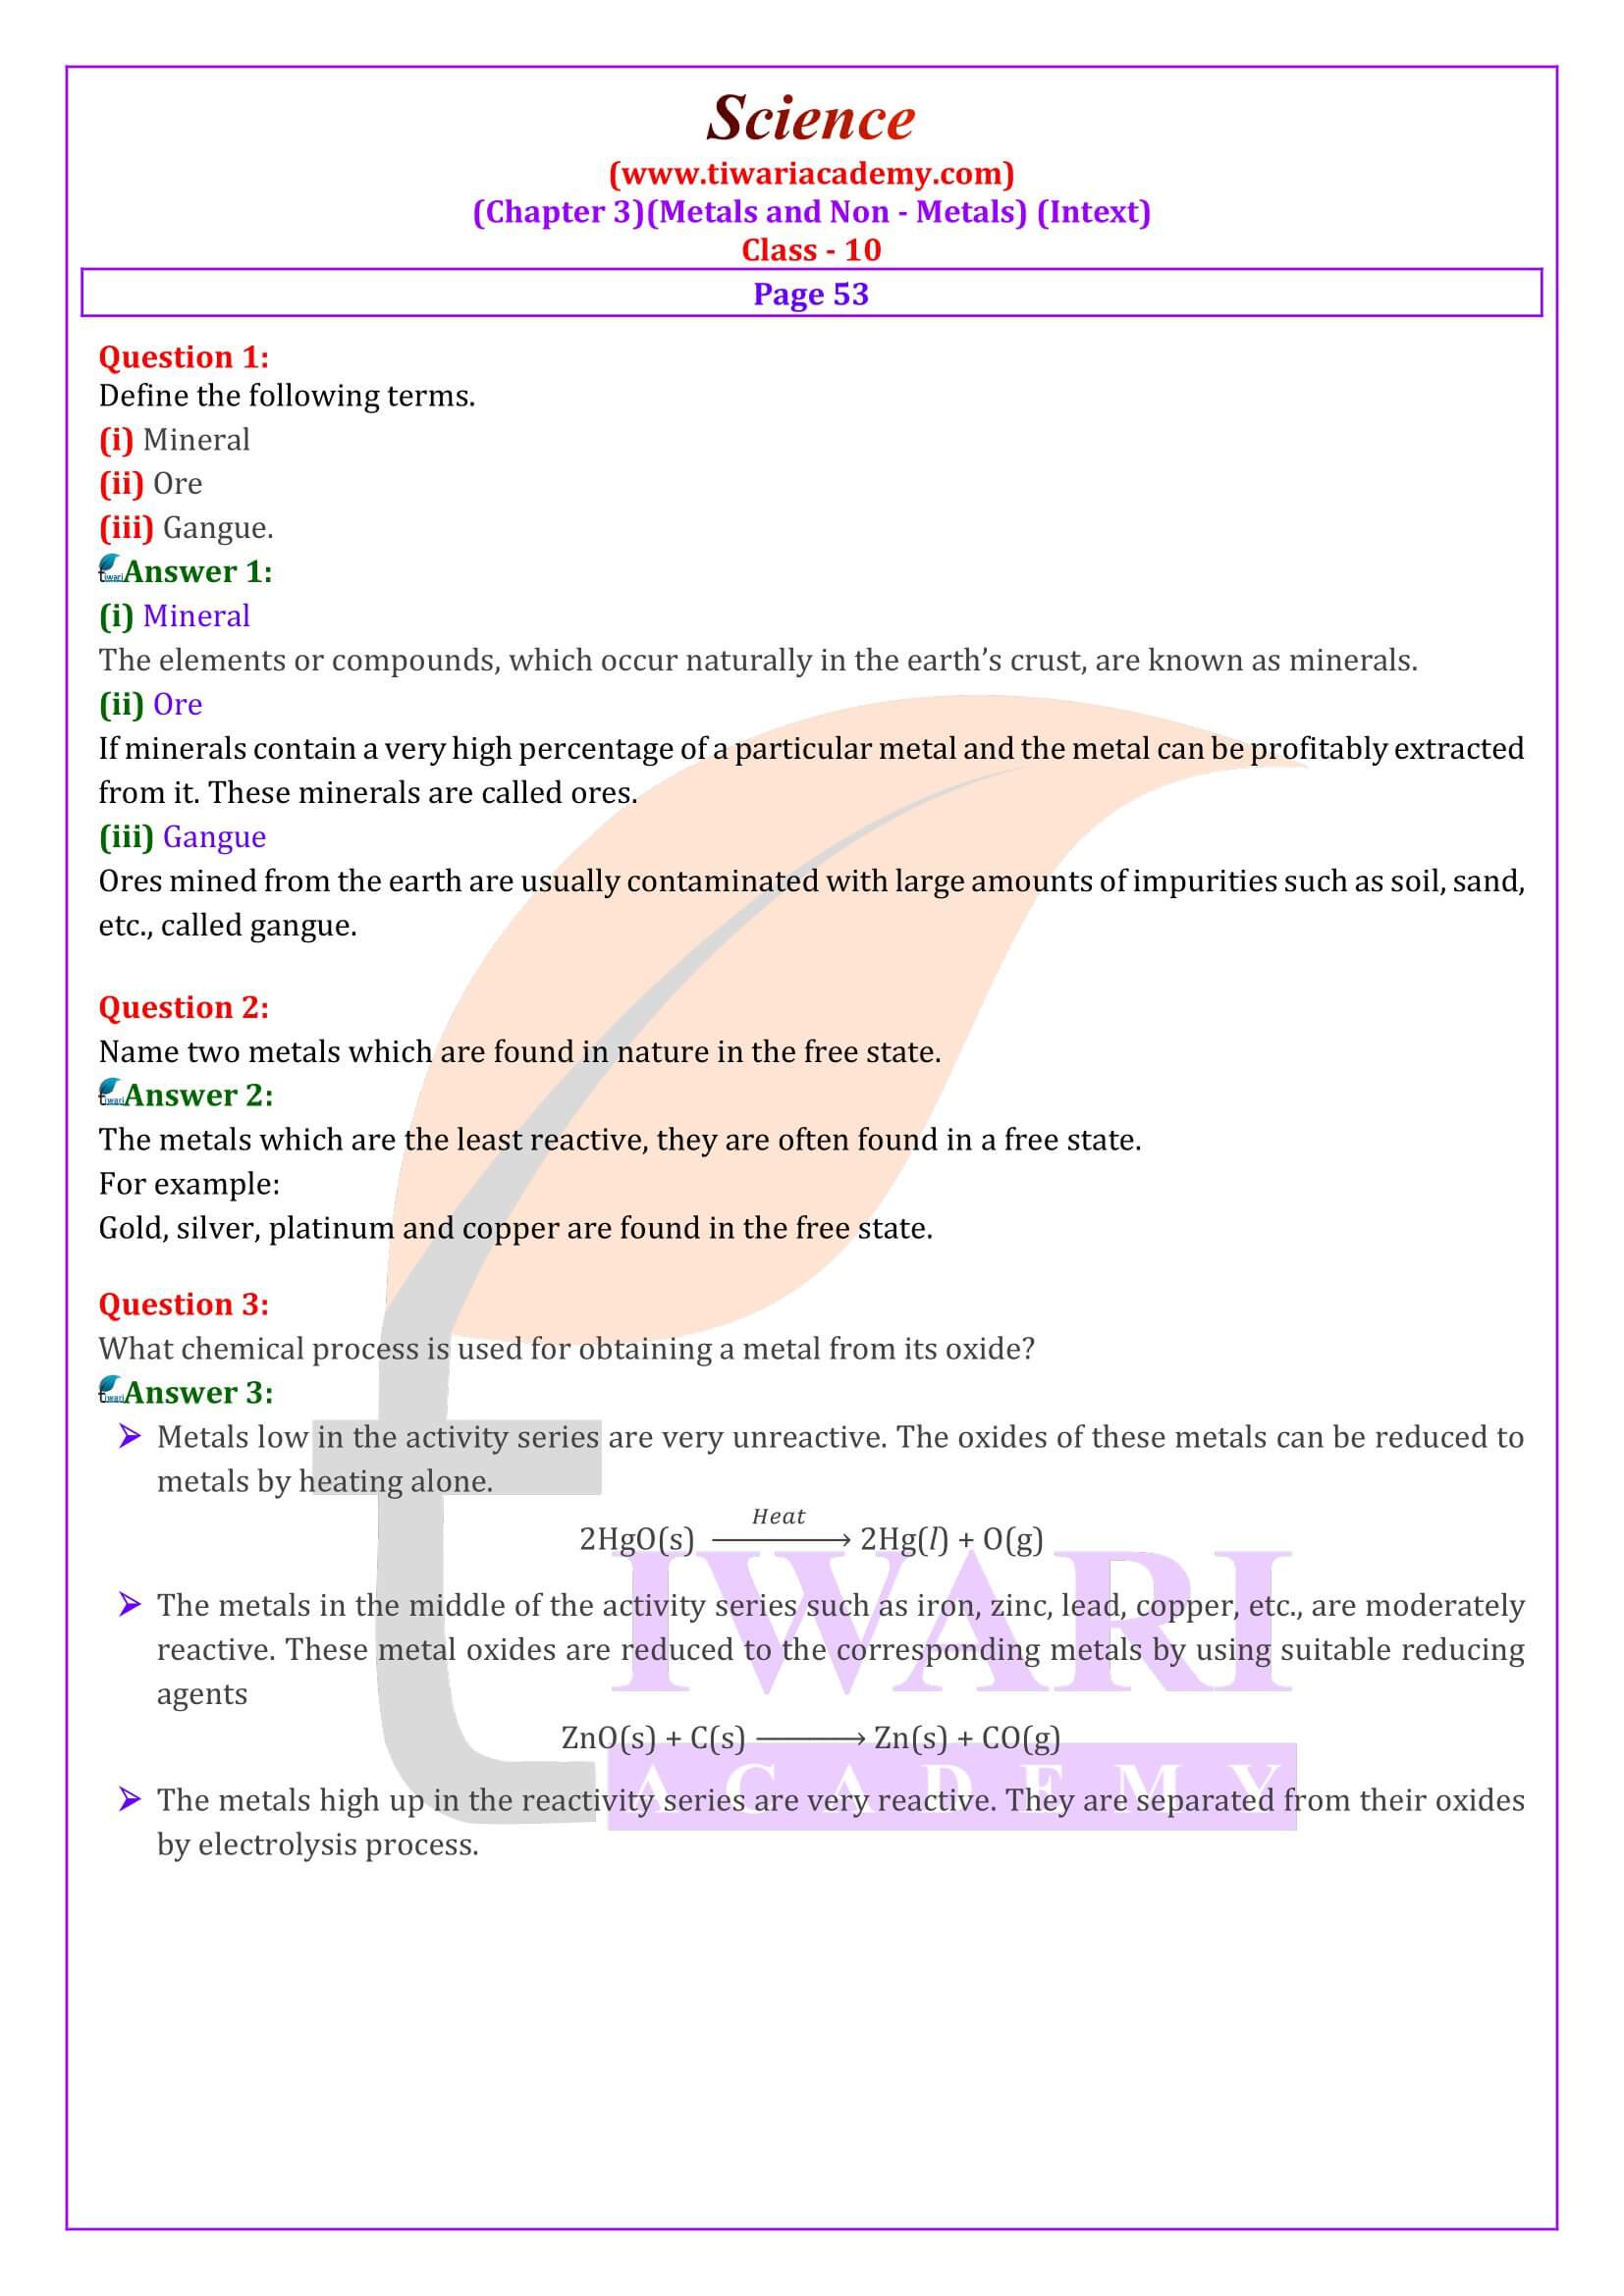 NCERT Solutions for Class 10 Science Chapter 3 guide